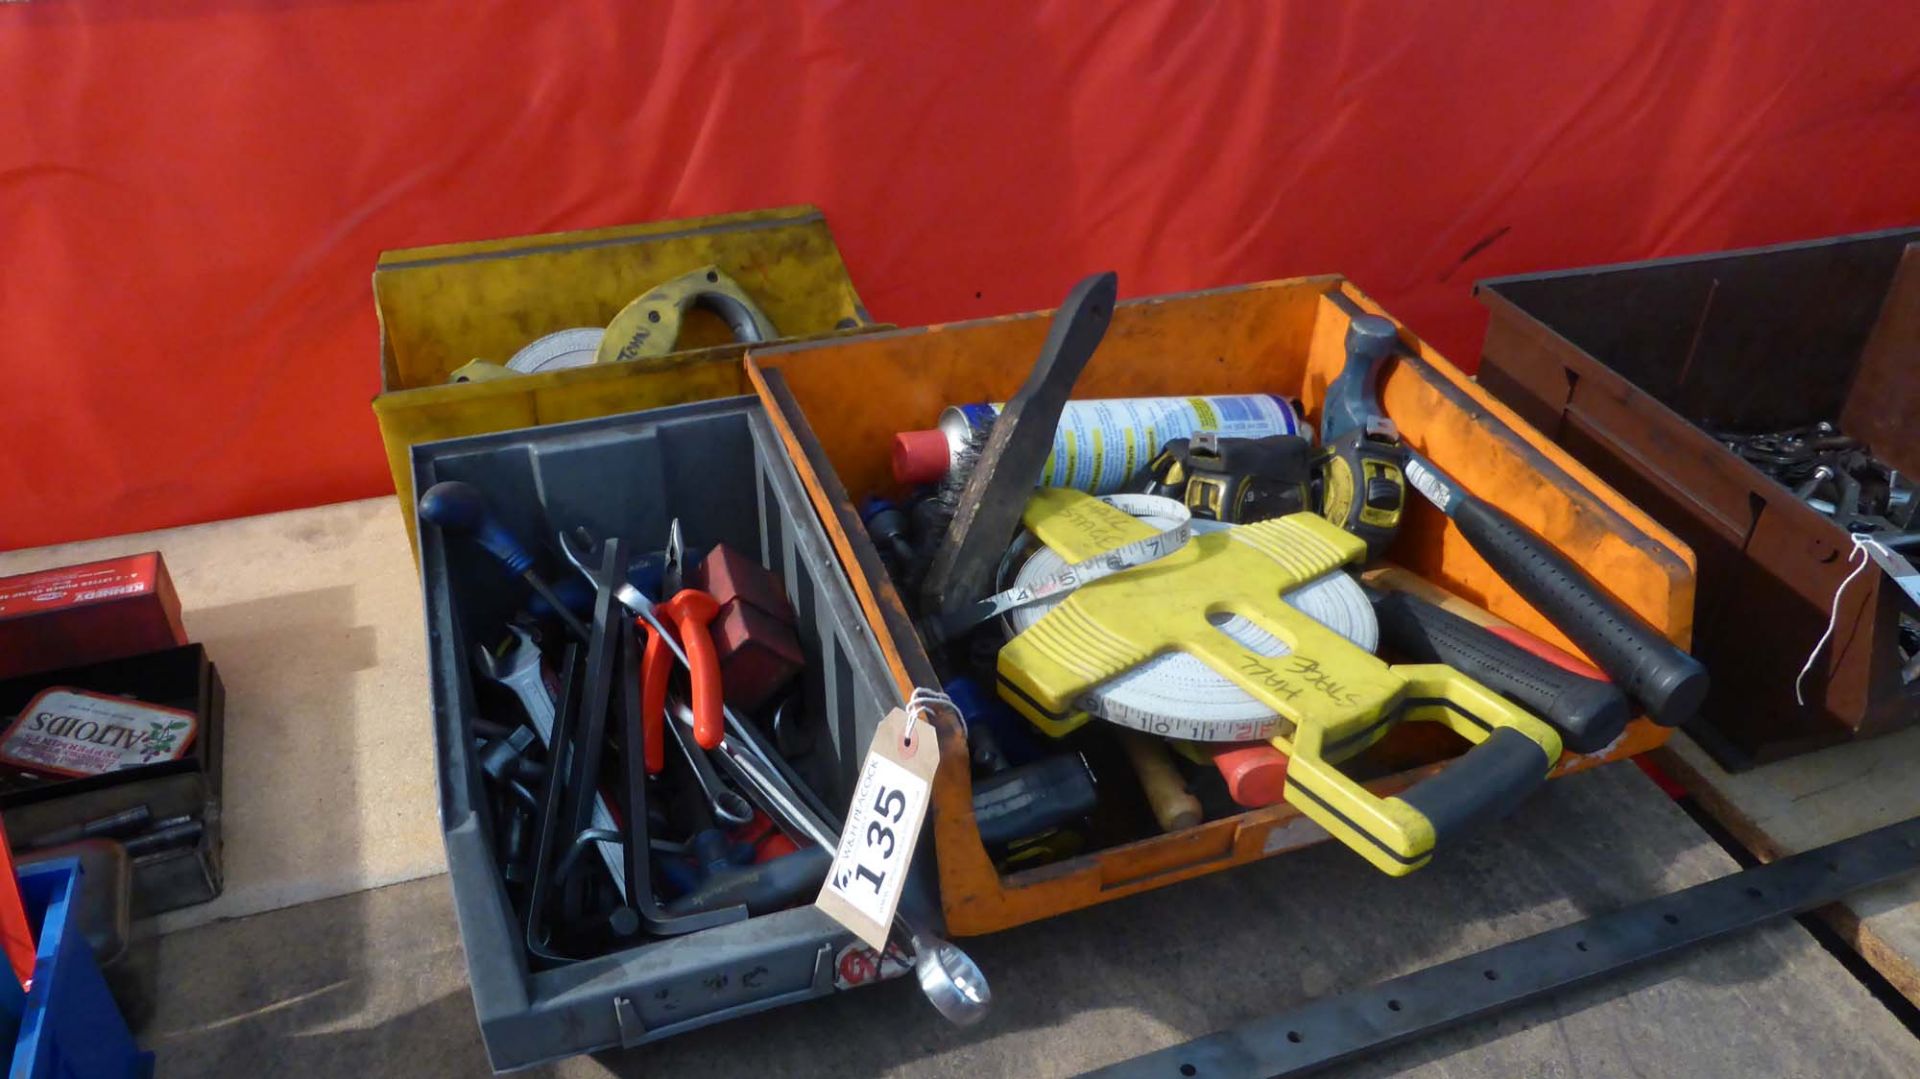 Three linbins of various allen keys, hand tools, tapes and spanners